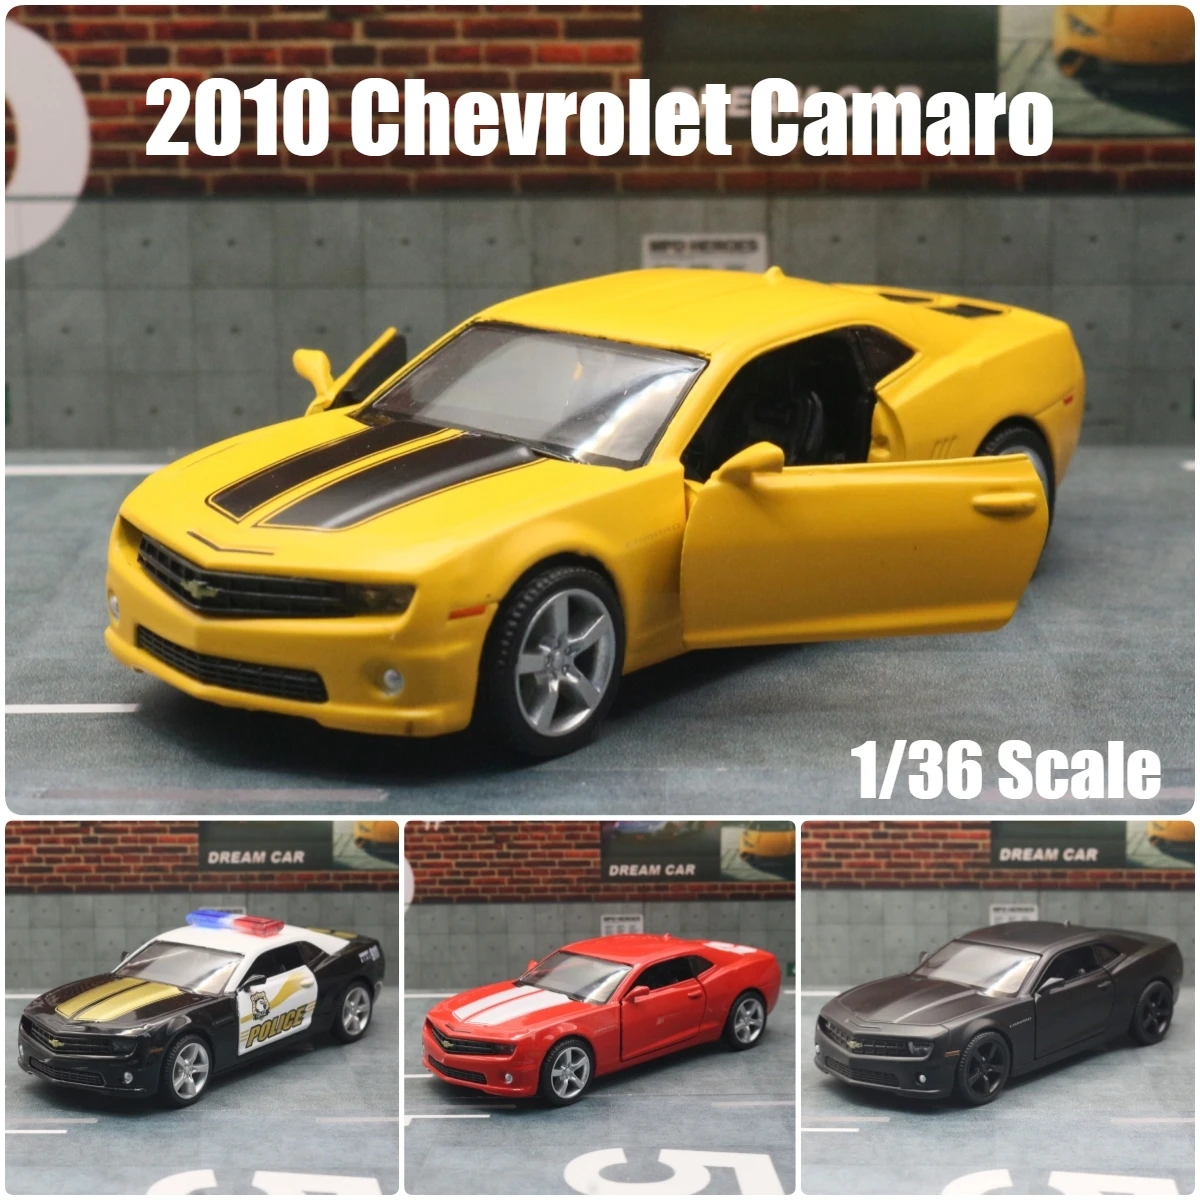 

1/36 Chevrolet Camaro Super Sport Toy Car Model 5'' 1:36 RMZ CiTY Diecast Miniature Vehicle Pull Back Collection Gift for Boys